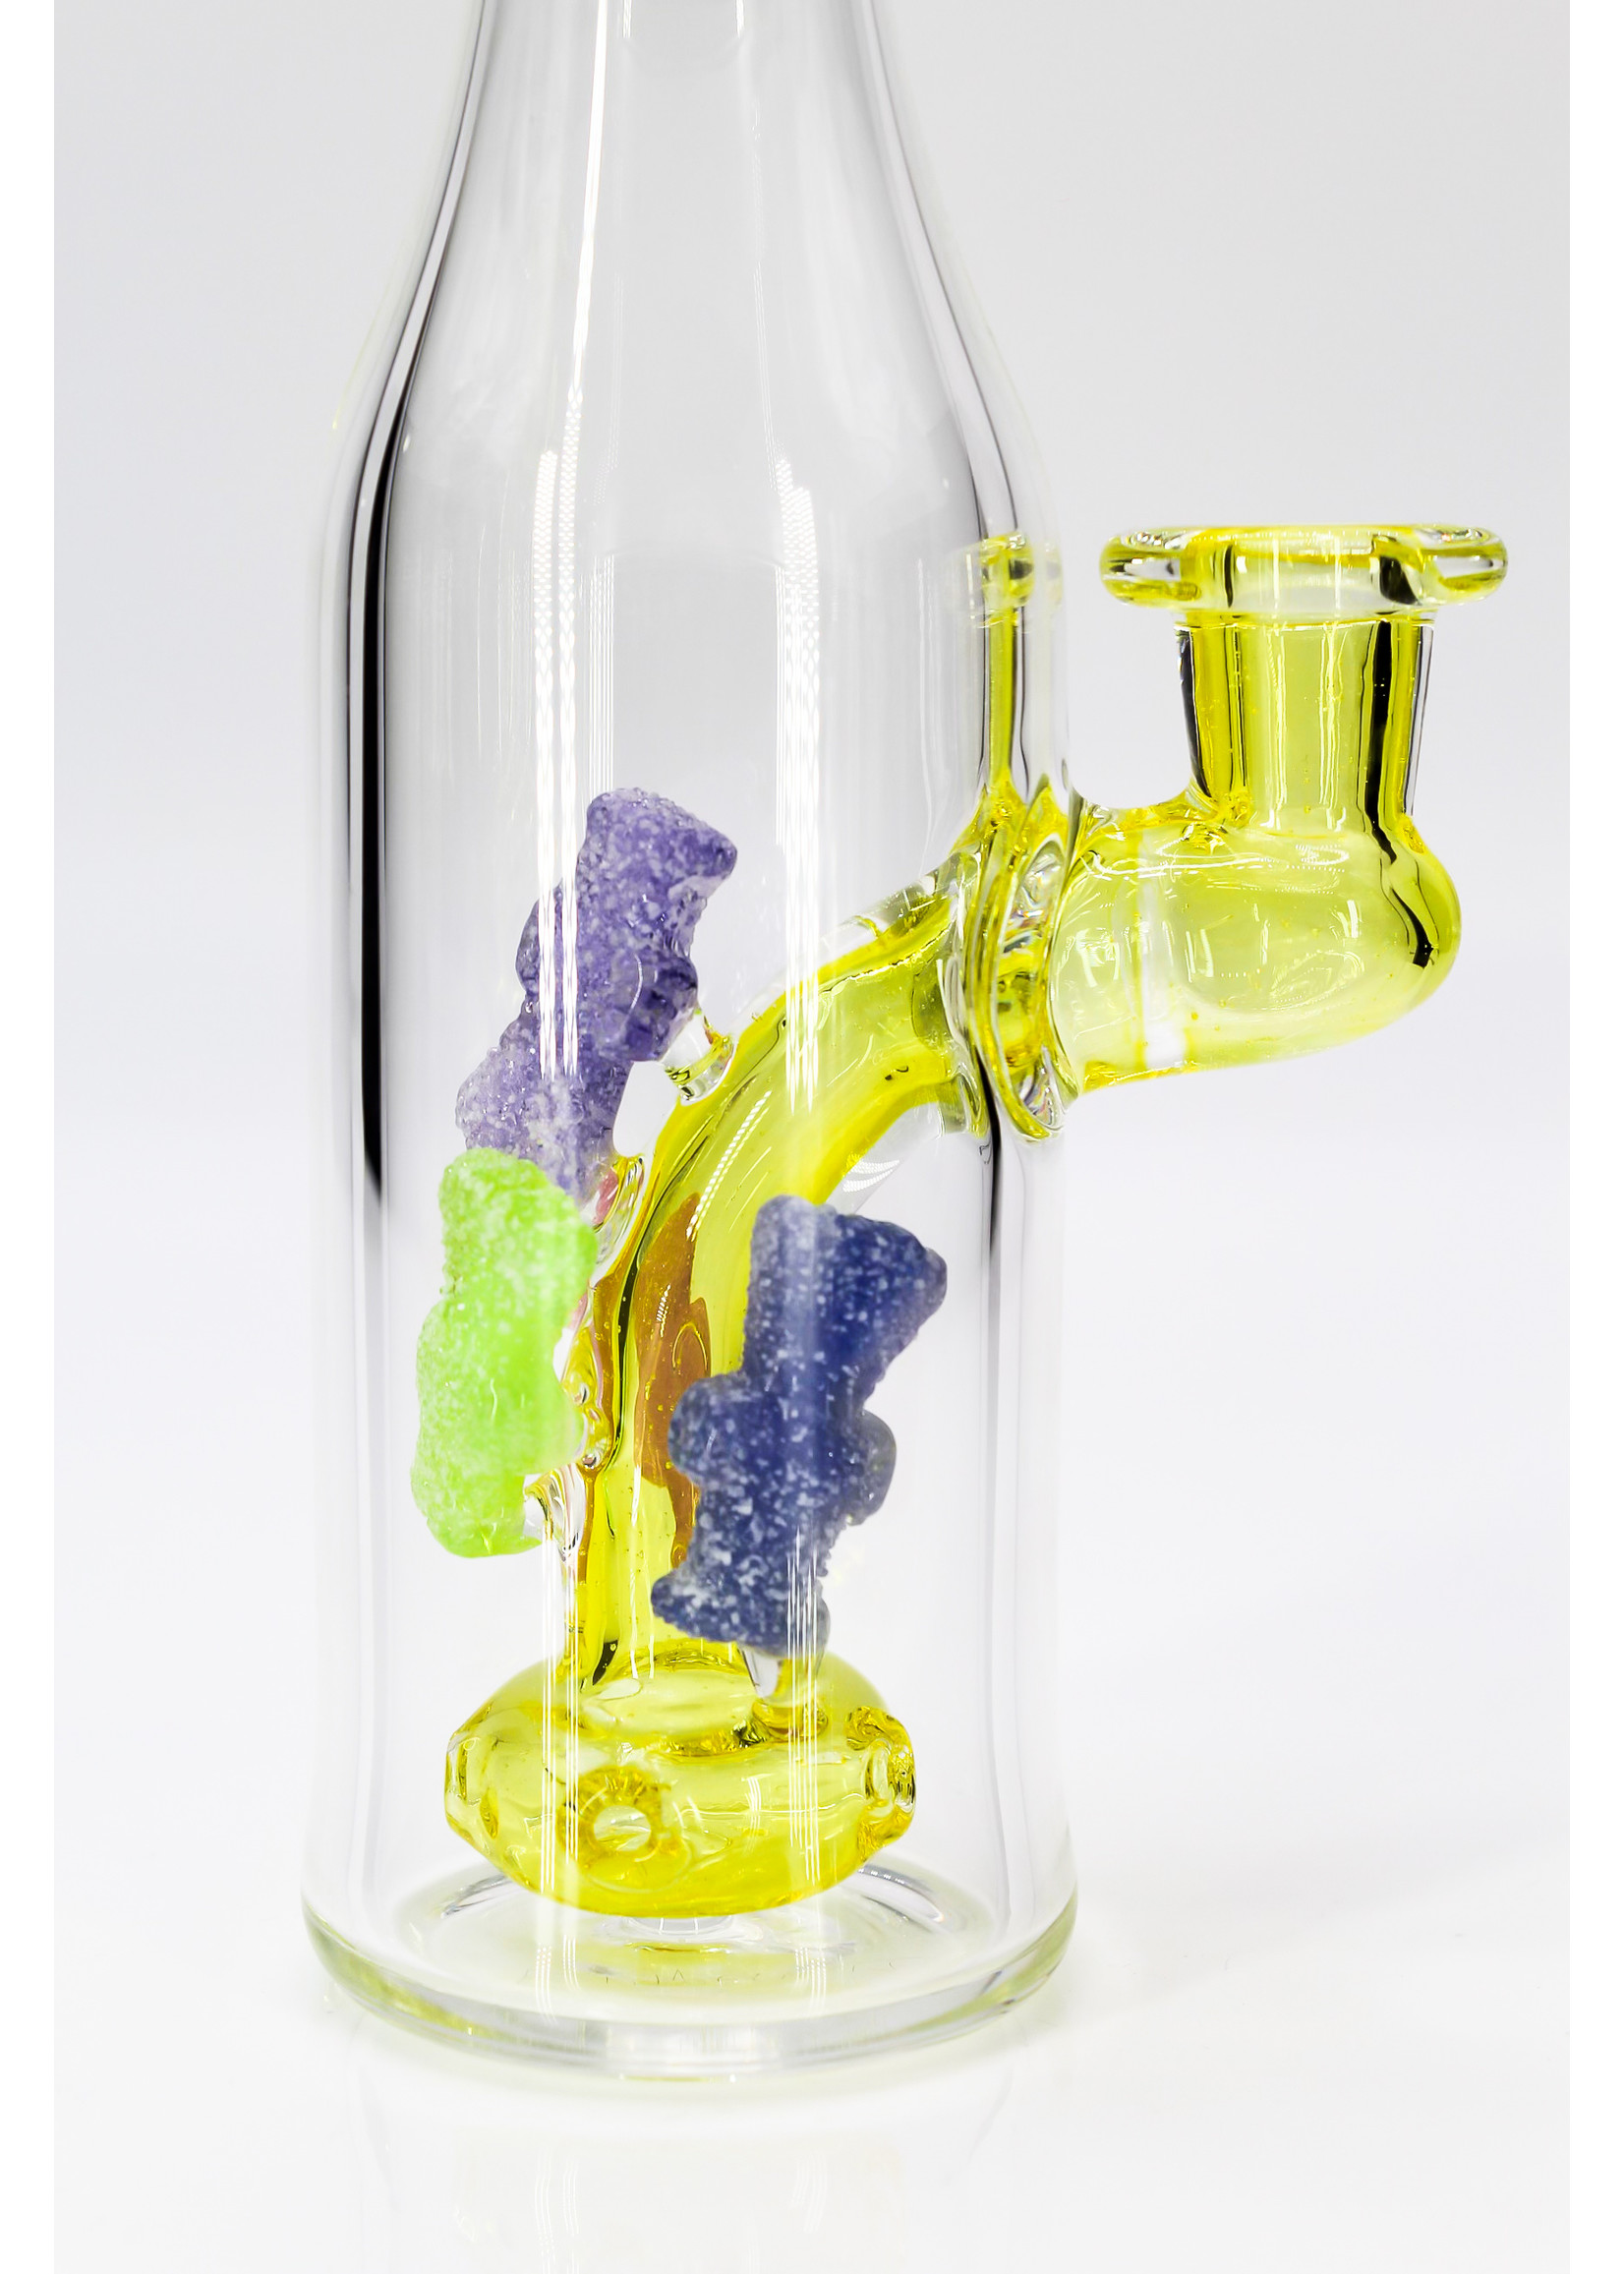 Emperial Glass Emperial Glass Bottle Rig #4